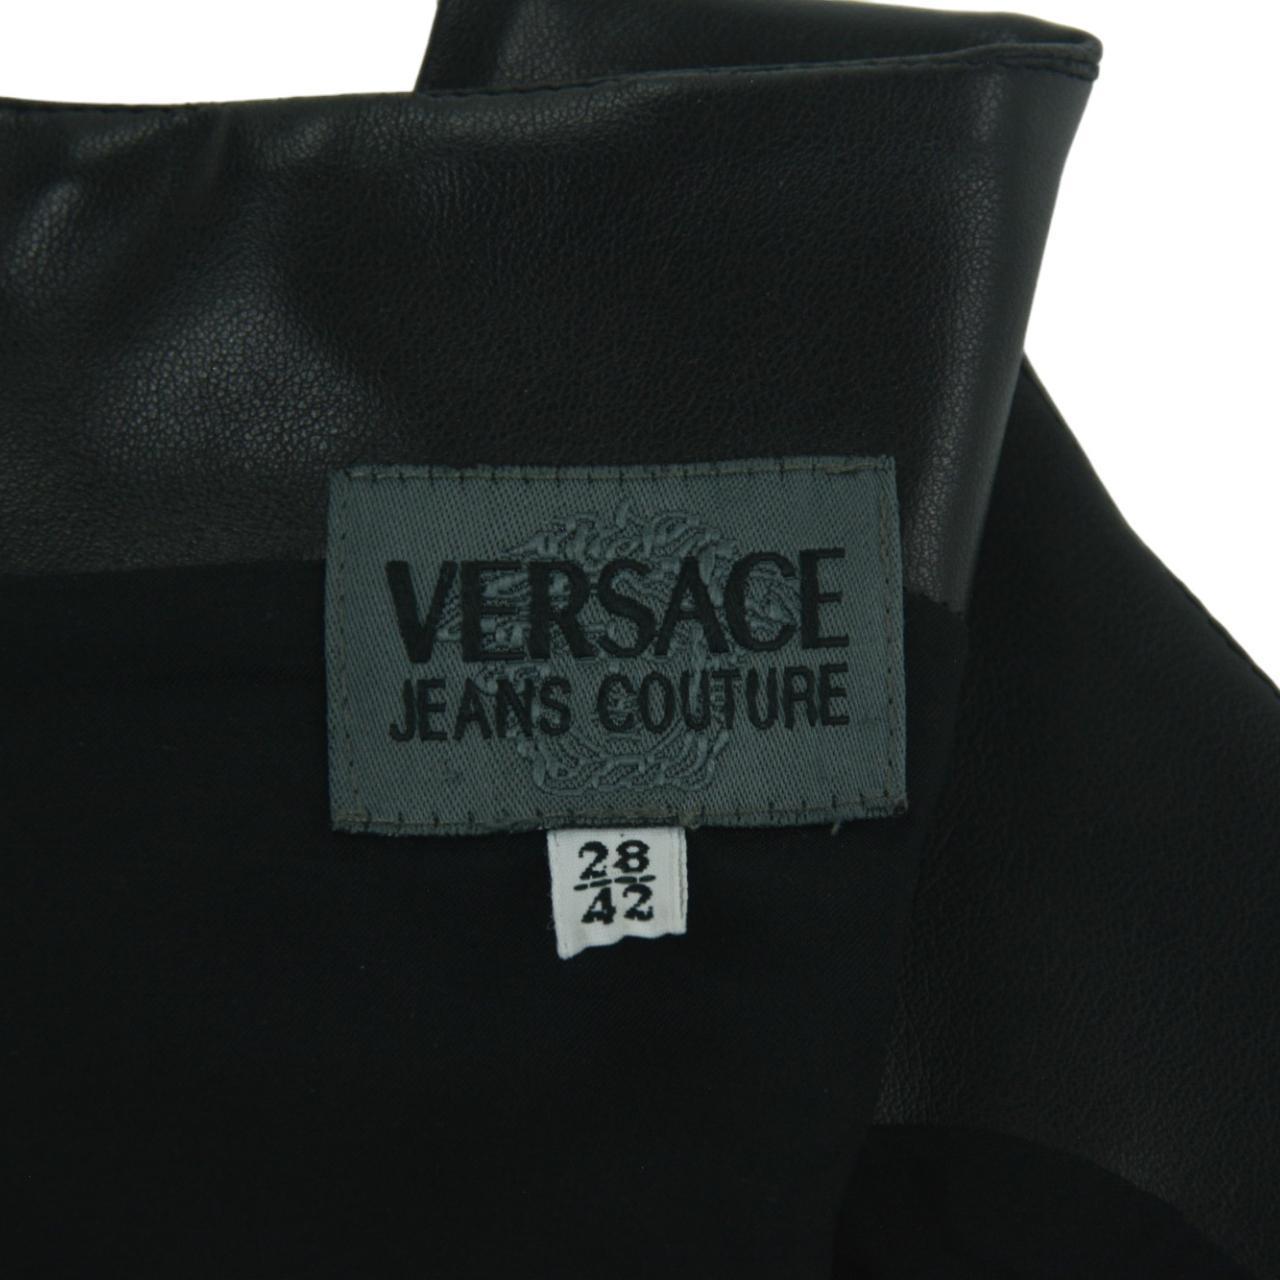 Vintage Versace Jeans Couture Size 28/42 - Known Source